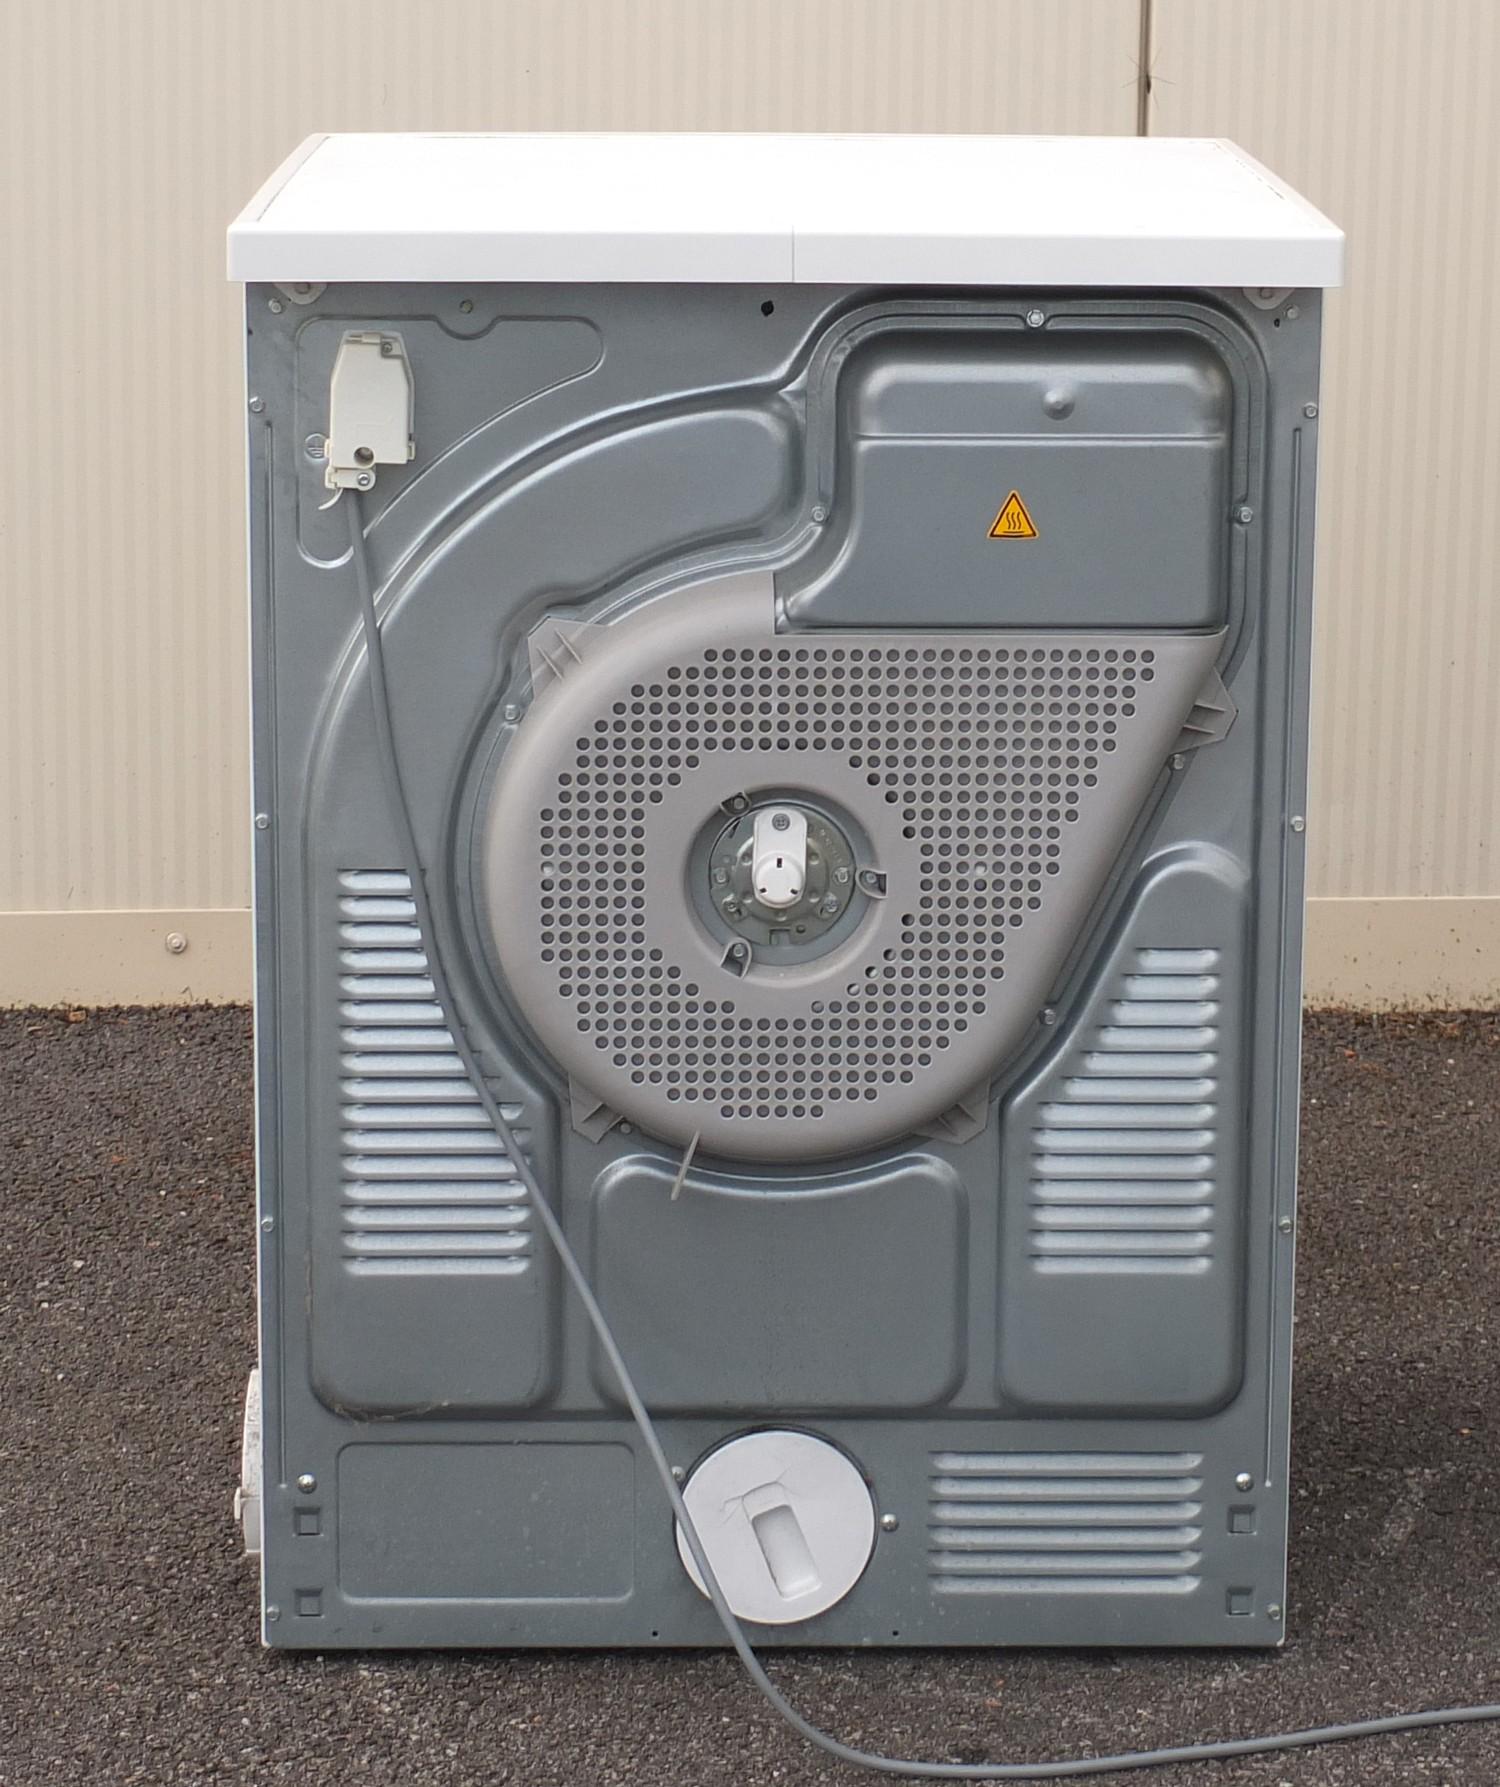 Zanussi 7kg sensor dryer, 85cm high : For Further Condition Reports Please Visit Our Website, - Image 3 of 3